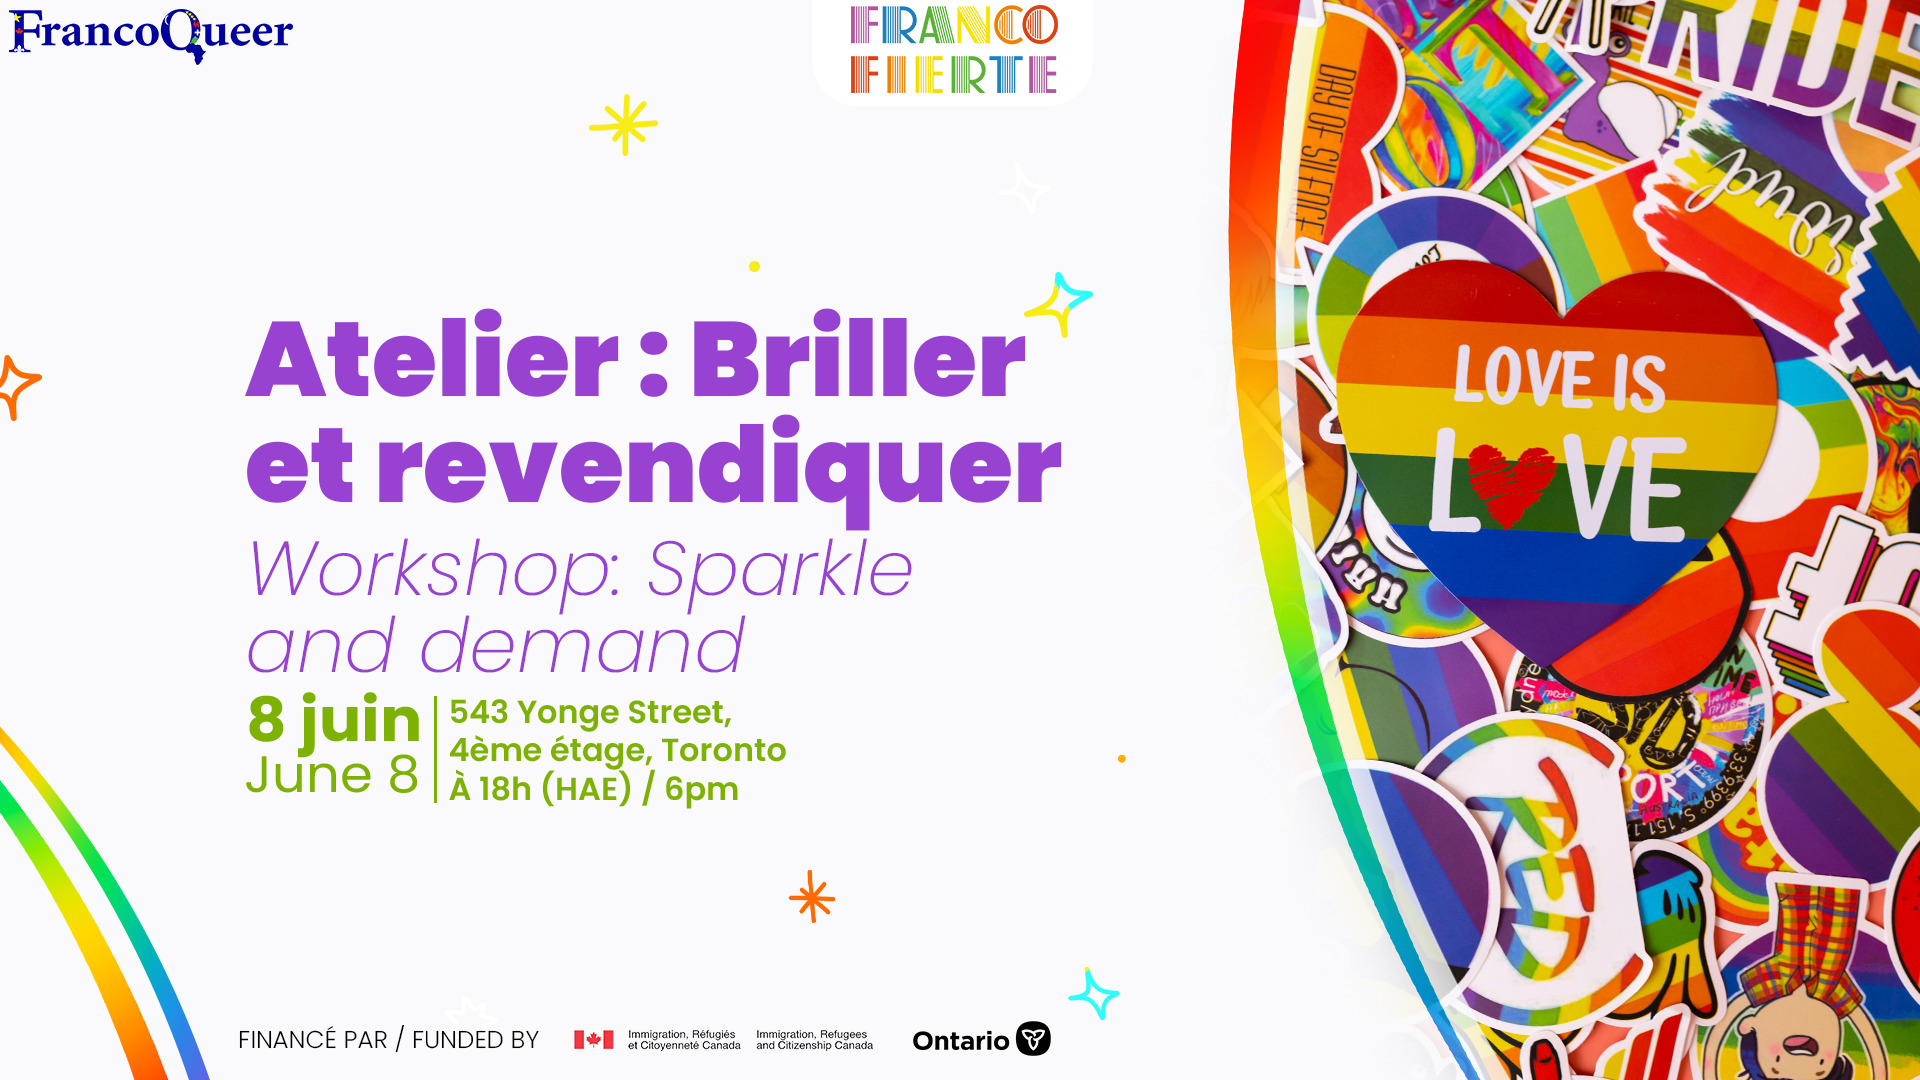 FrancoQueer - Workshop: Sparkle and Demand Event